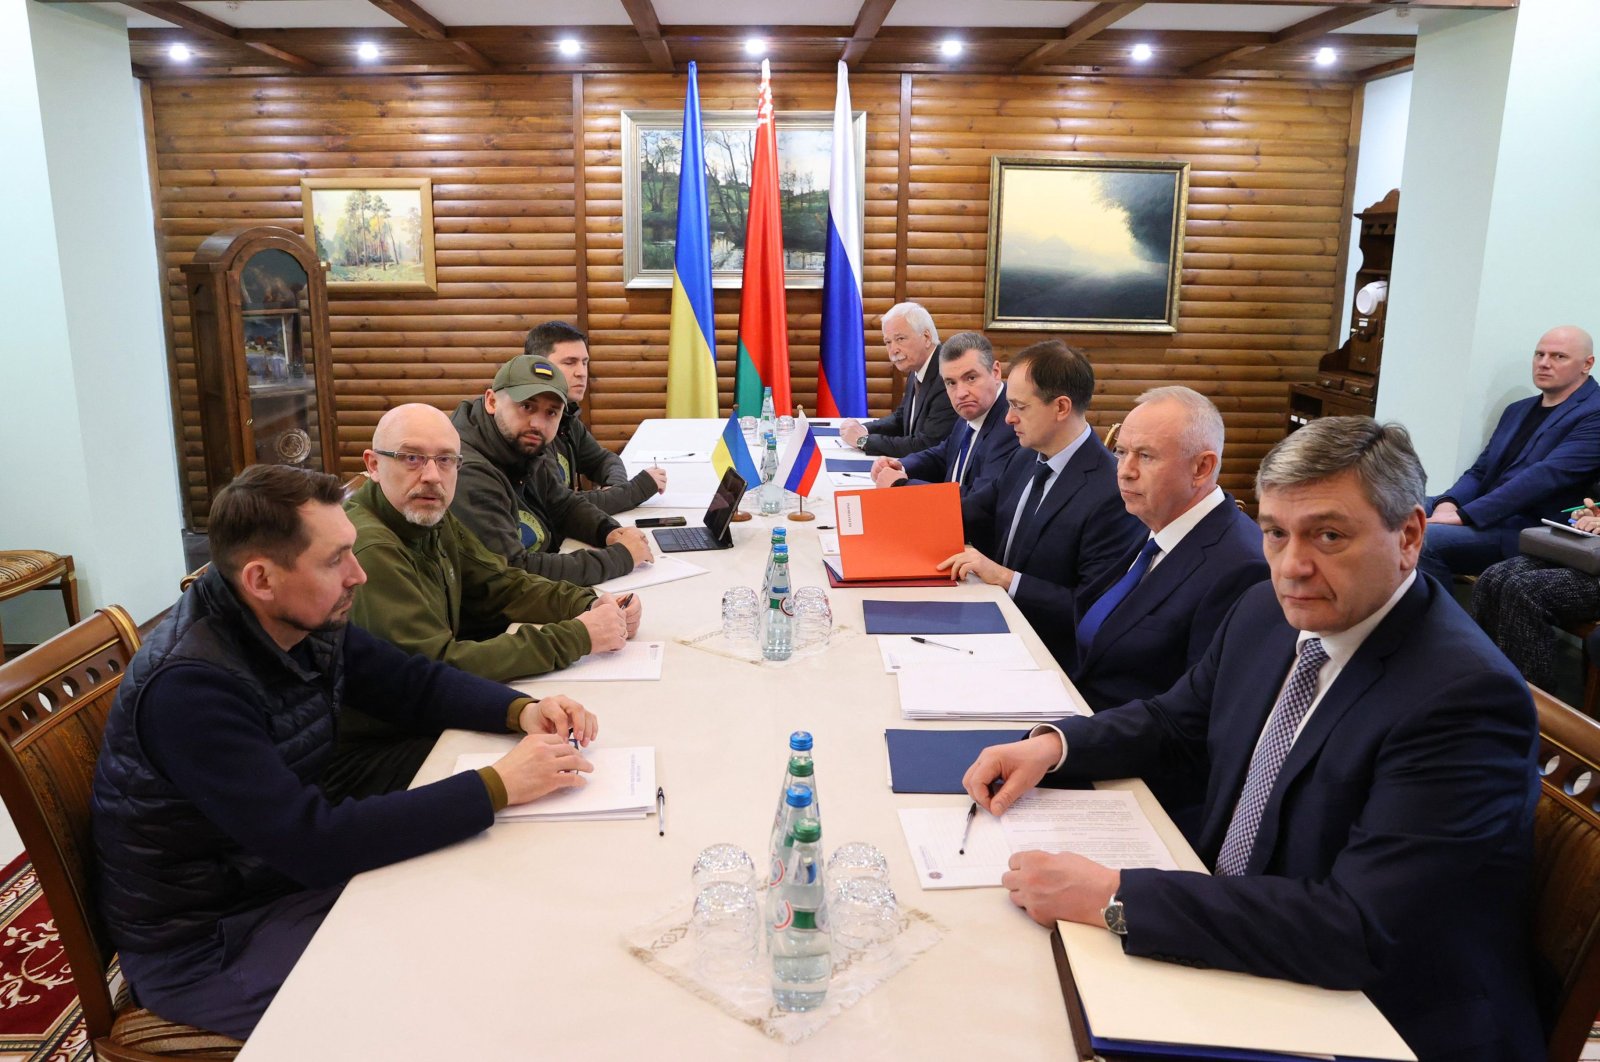 Ukrainian Deputy Foreign Minister Mykola Tochytskyi (L), Ukrainian Defense Minister Oleksiy Reznikov (2nd L), the head of the Ukrainian Servant of the People faction Davyd Arakhamia (3rd L), adviser to the head of the Office of the President of Ukraine Mykhailo Podoliak (4th L), Russian Ambassador to Belarus Boris Gryzlov (5th R), Leonid Slutsky, chairperson of the Russian State Duma&#039;s International Affairs Committee (4th R), Russian presidential aide and the head of the Russian delegation Vladimir Medinsky (3rd R), Deputy Minister of Defense Alexander Fomin (2nd R) and Deputy Foreign Minister Andrei Rudenko pose prior the talks between delegations from Ukraine and Russia in Belarus&#039; Brest region, March 7, 2022. (AFP Photo)